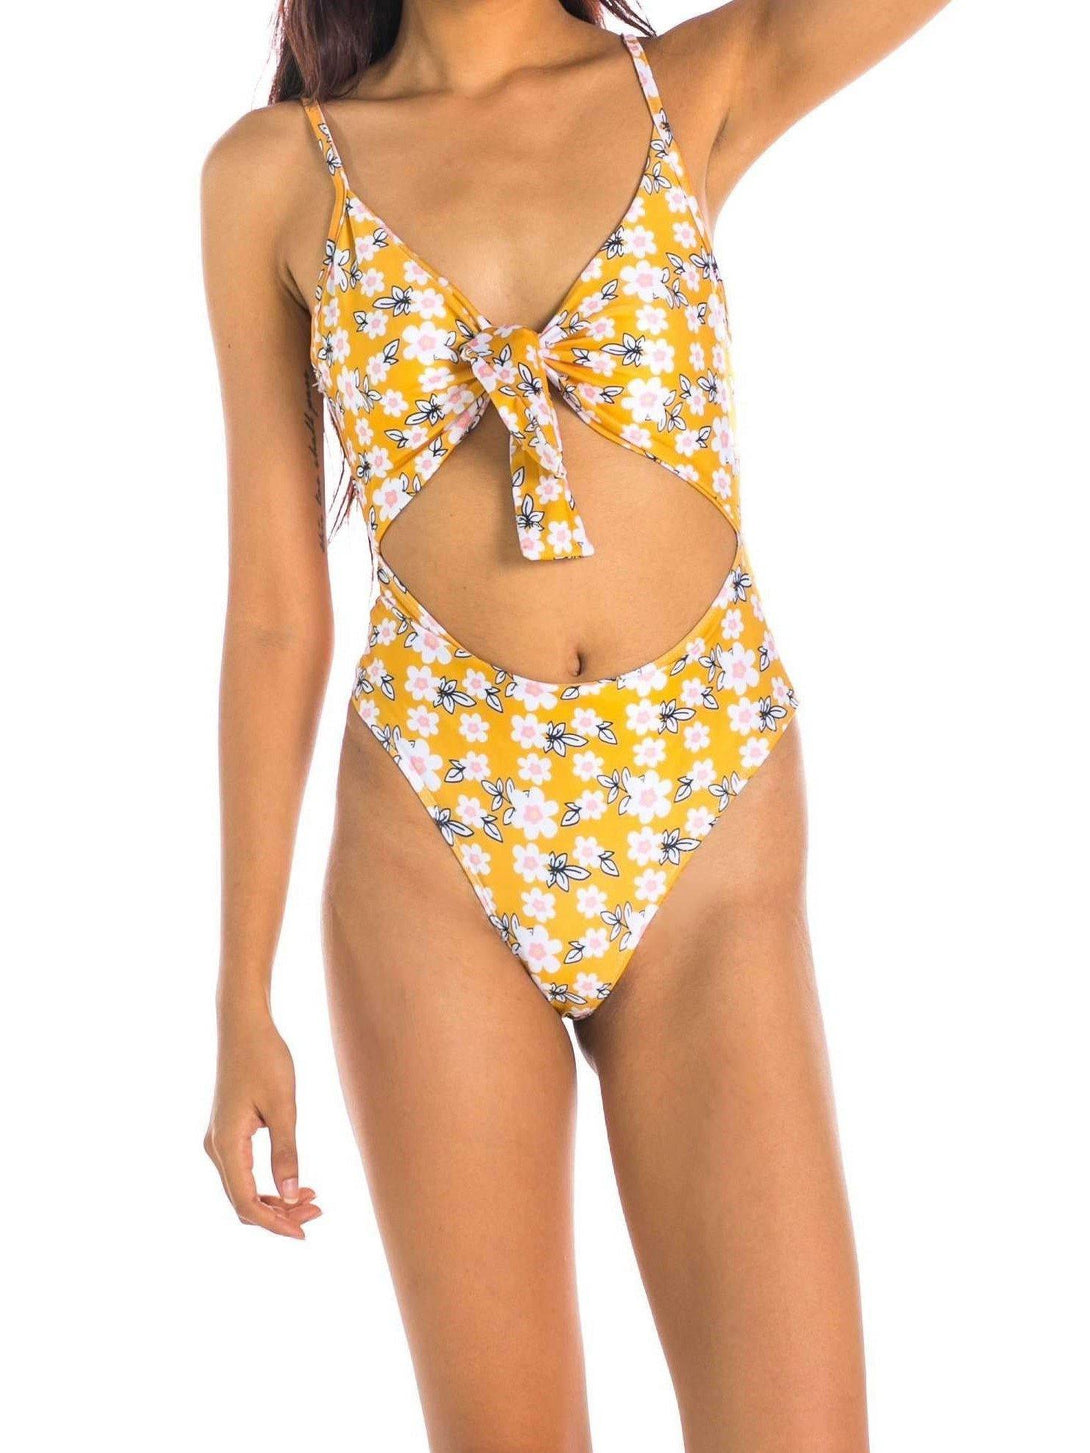 Olive Tie-Front High-Cut Cut-Out Monokini Yellow - Pink N' Proper